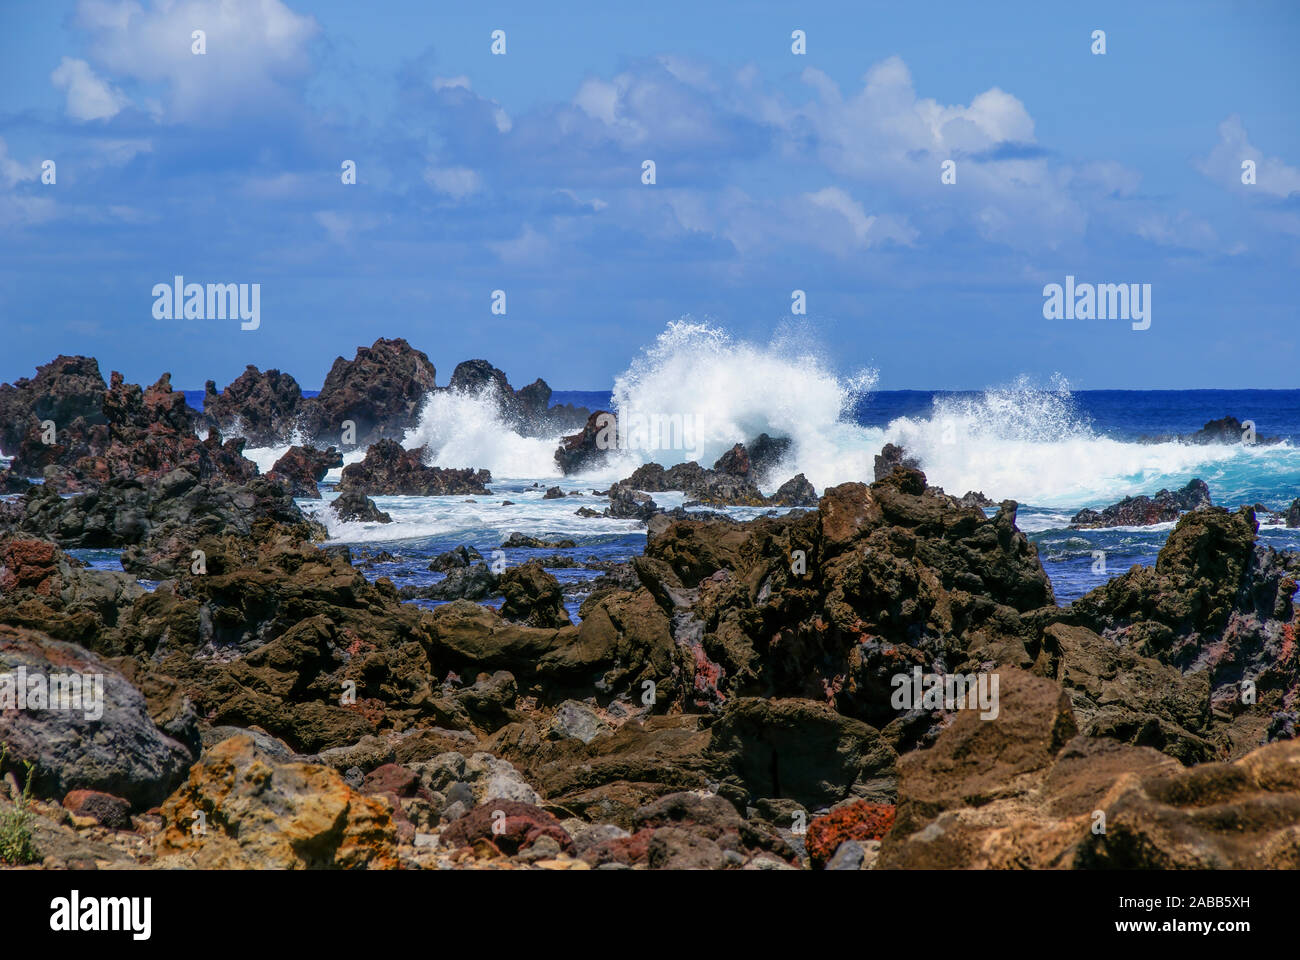 Blue ocean (sea) and white waves breaking on rocks on the rocky shoreline of Easter Island. Stock Photo